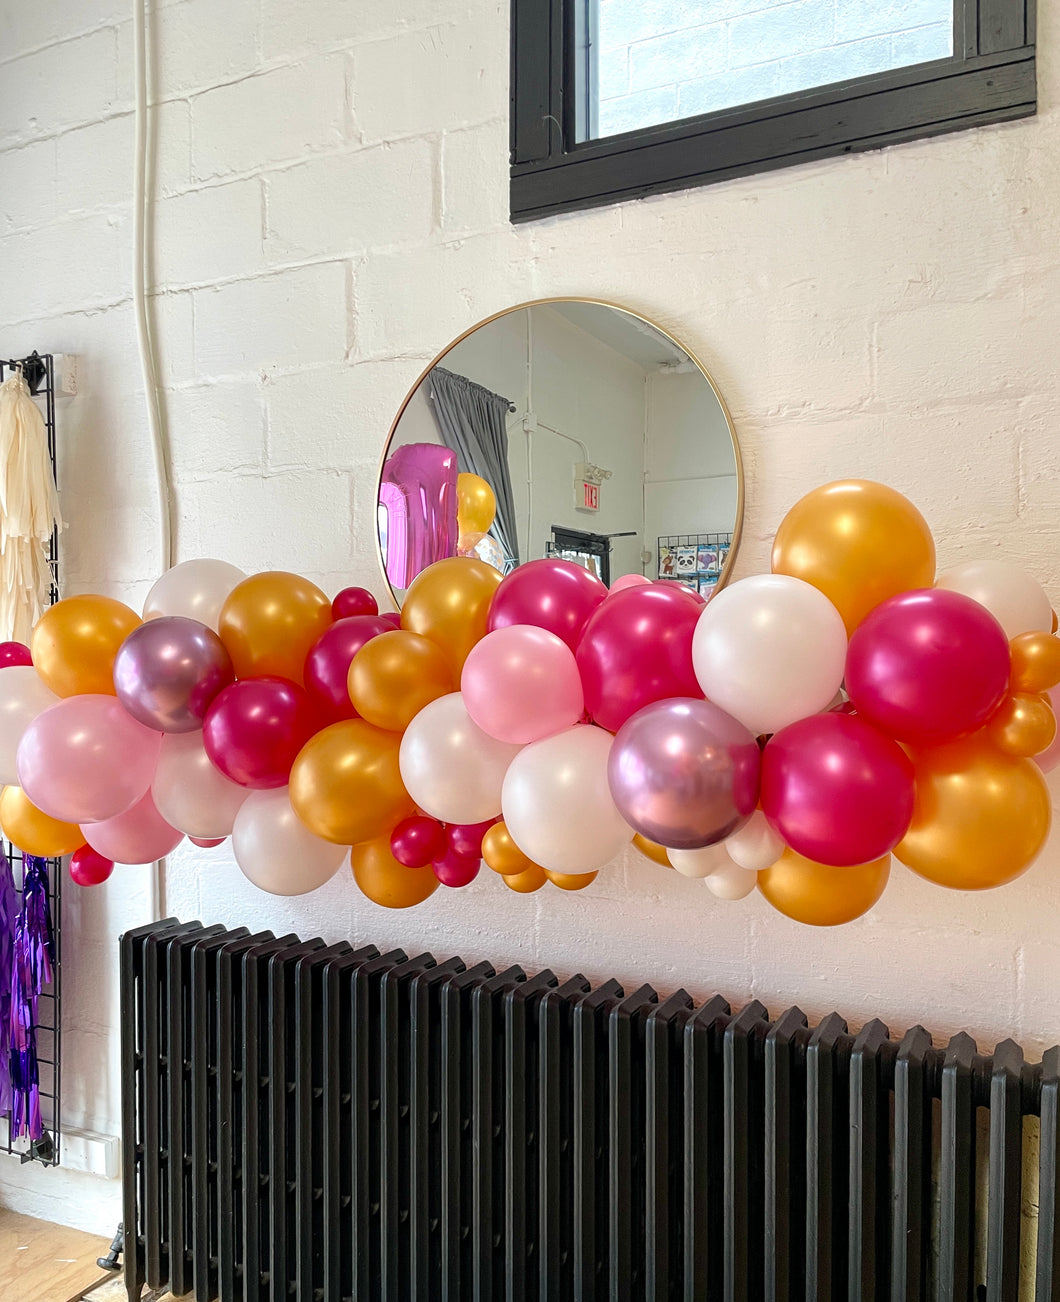 Pink Fruit Punch Balloon Garland - Organics on the fly